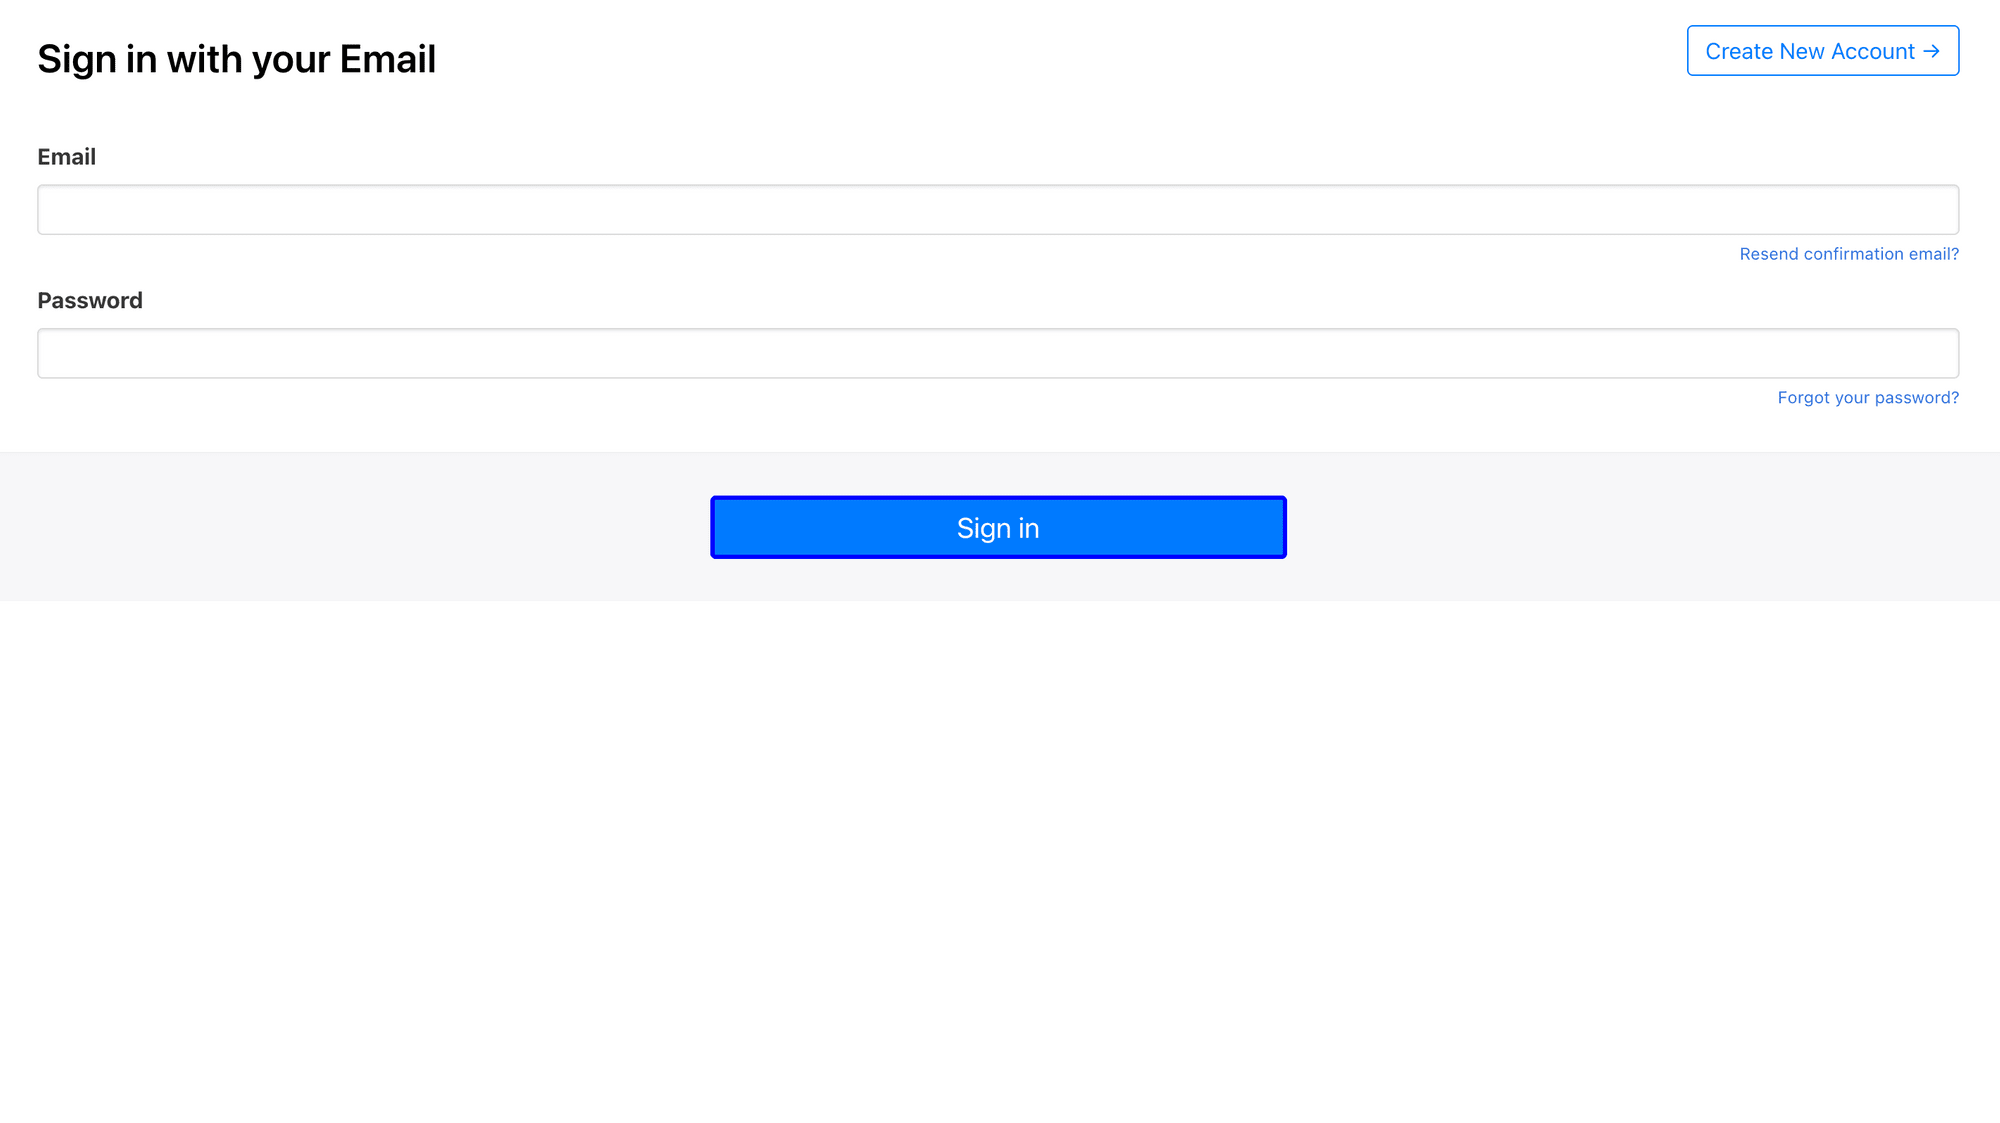 Screenshot of Browserbear helper sign in button selection